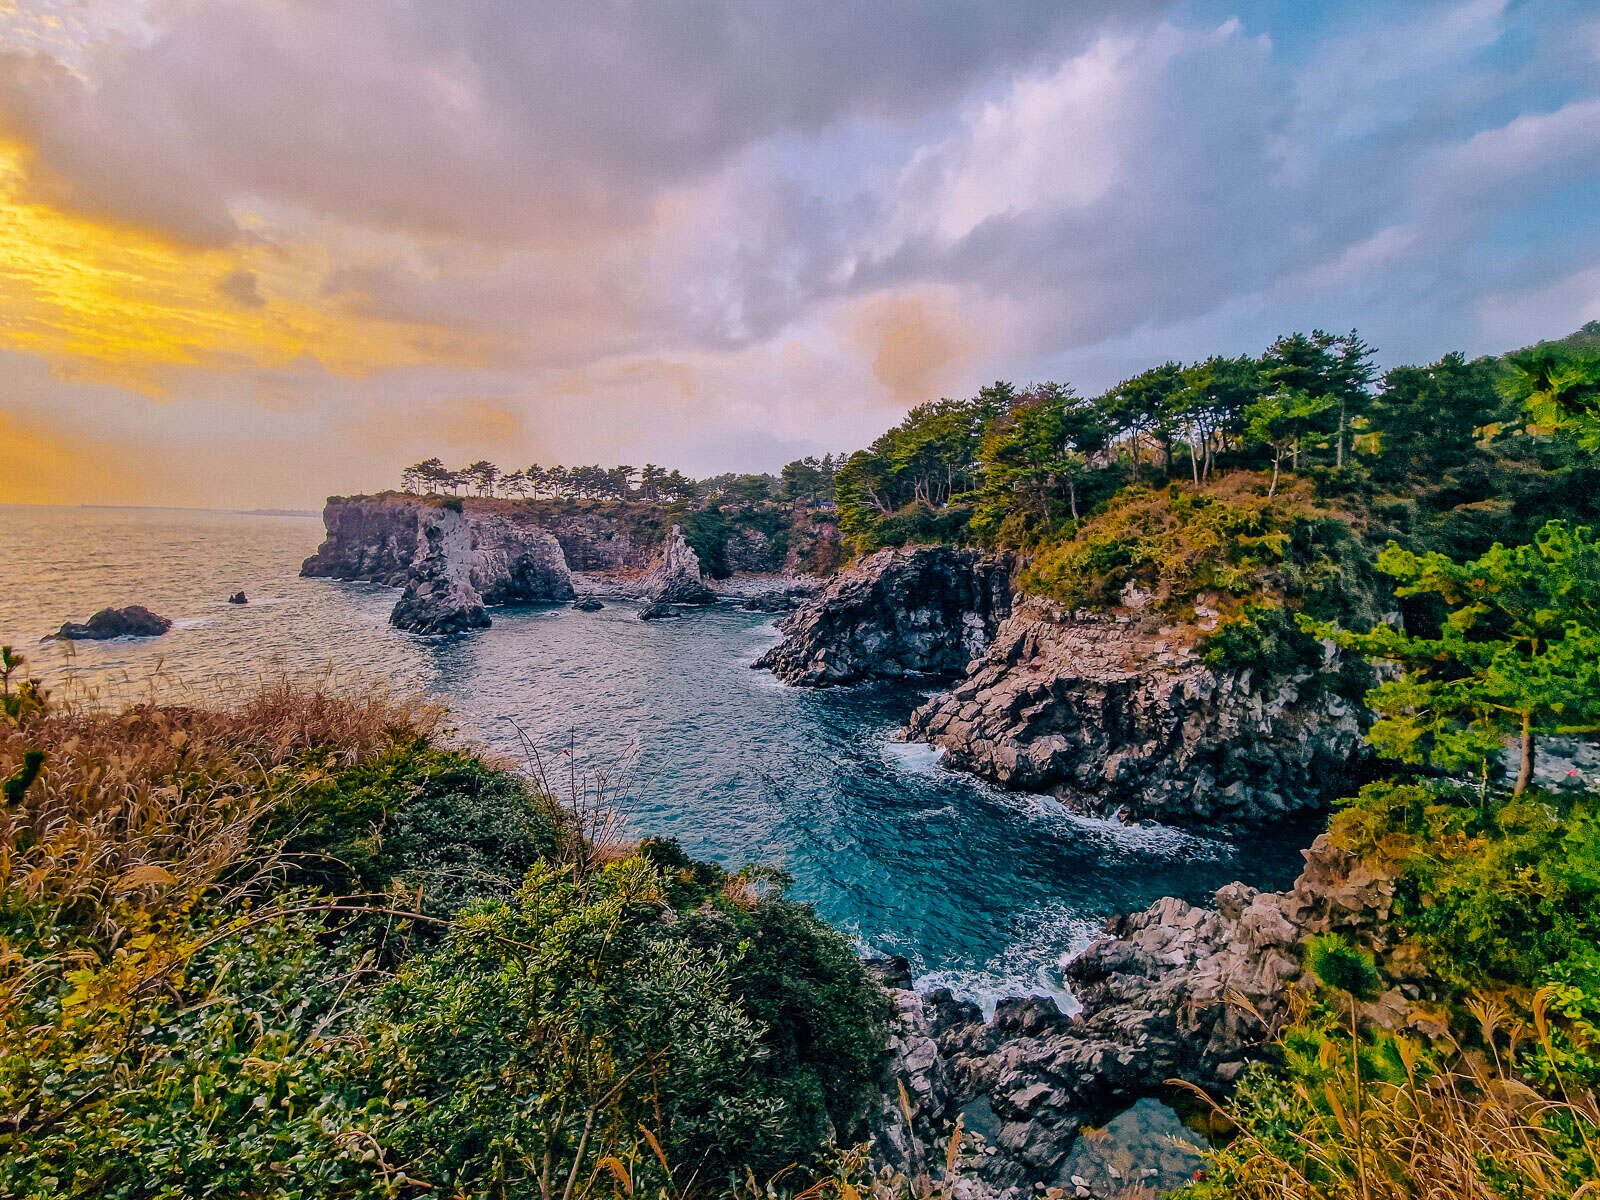 a rugged, rocky coastline with lots of greenery and blue seat at sunset